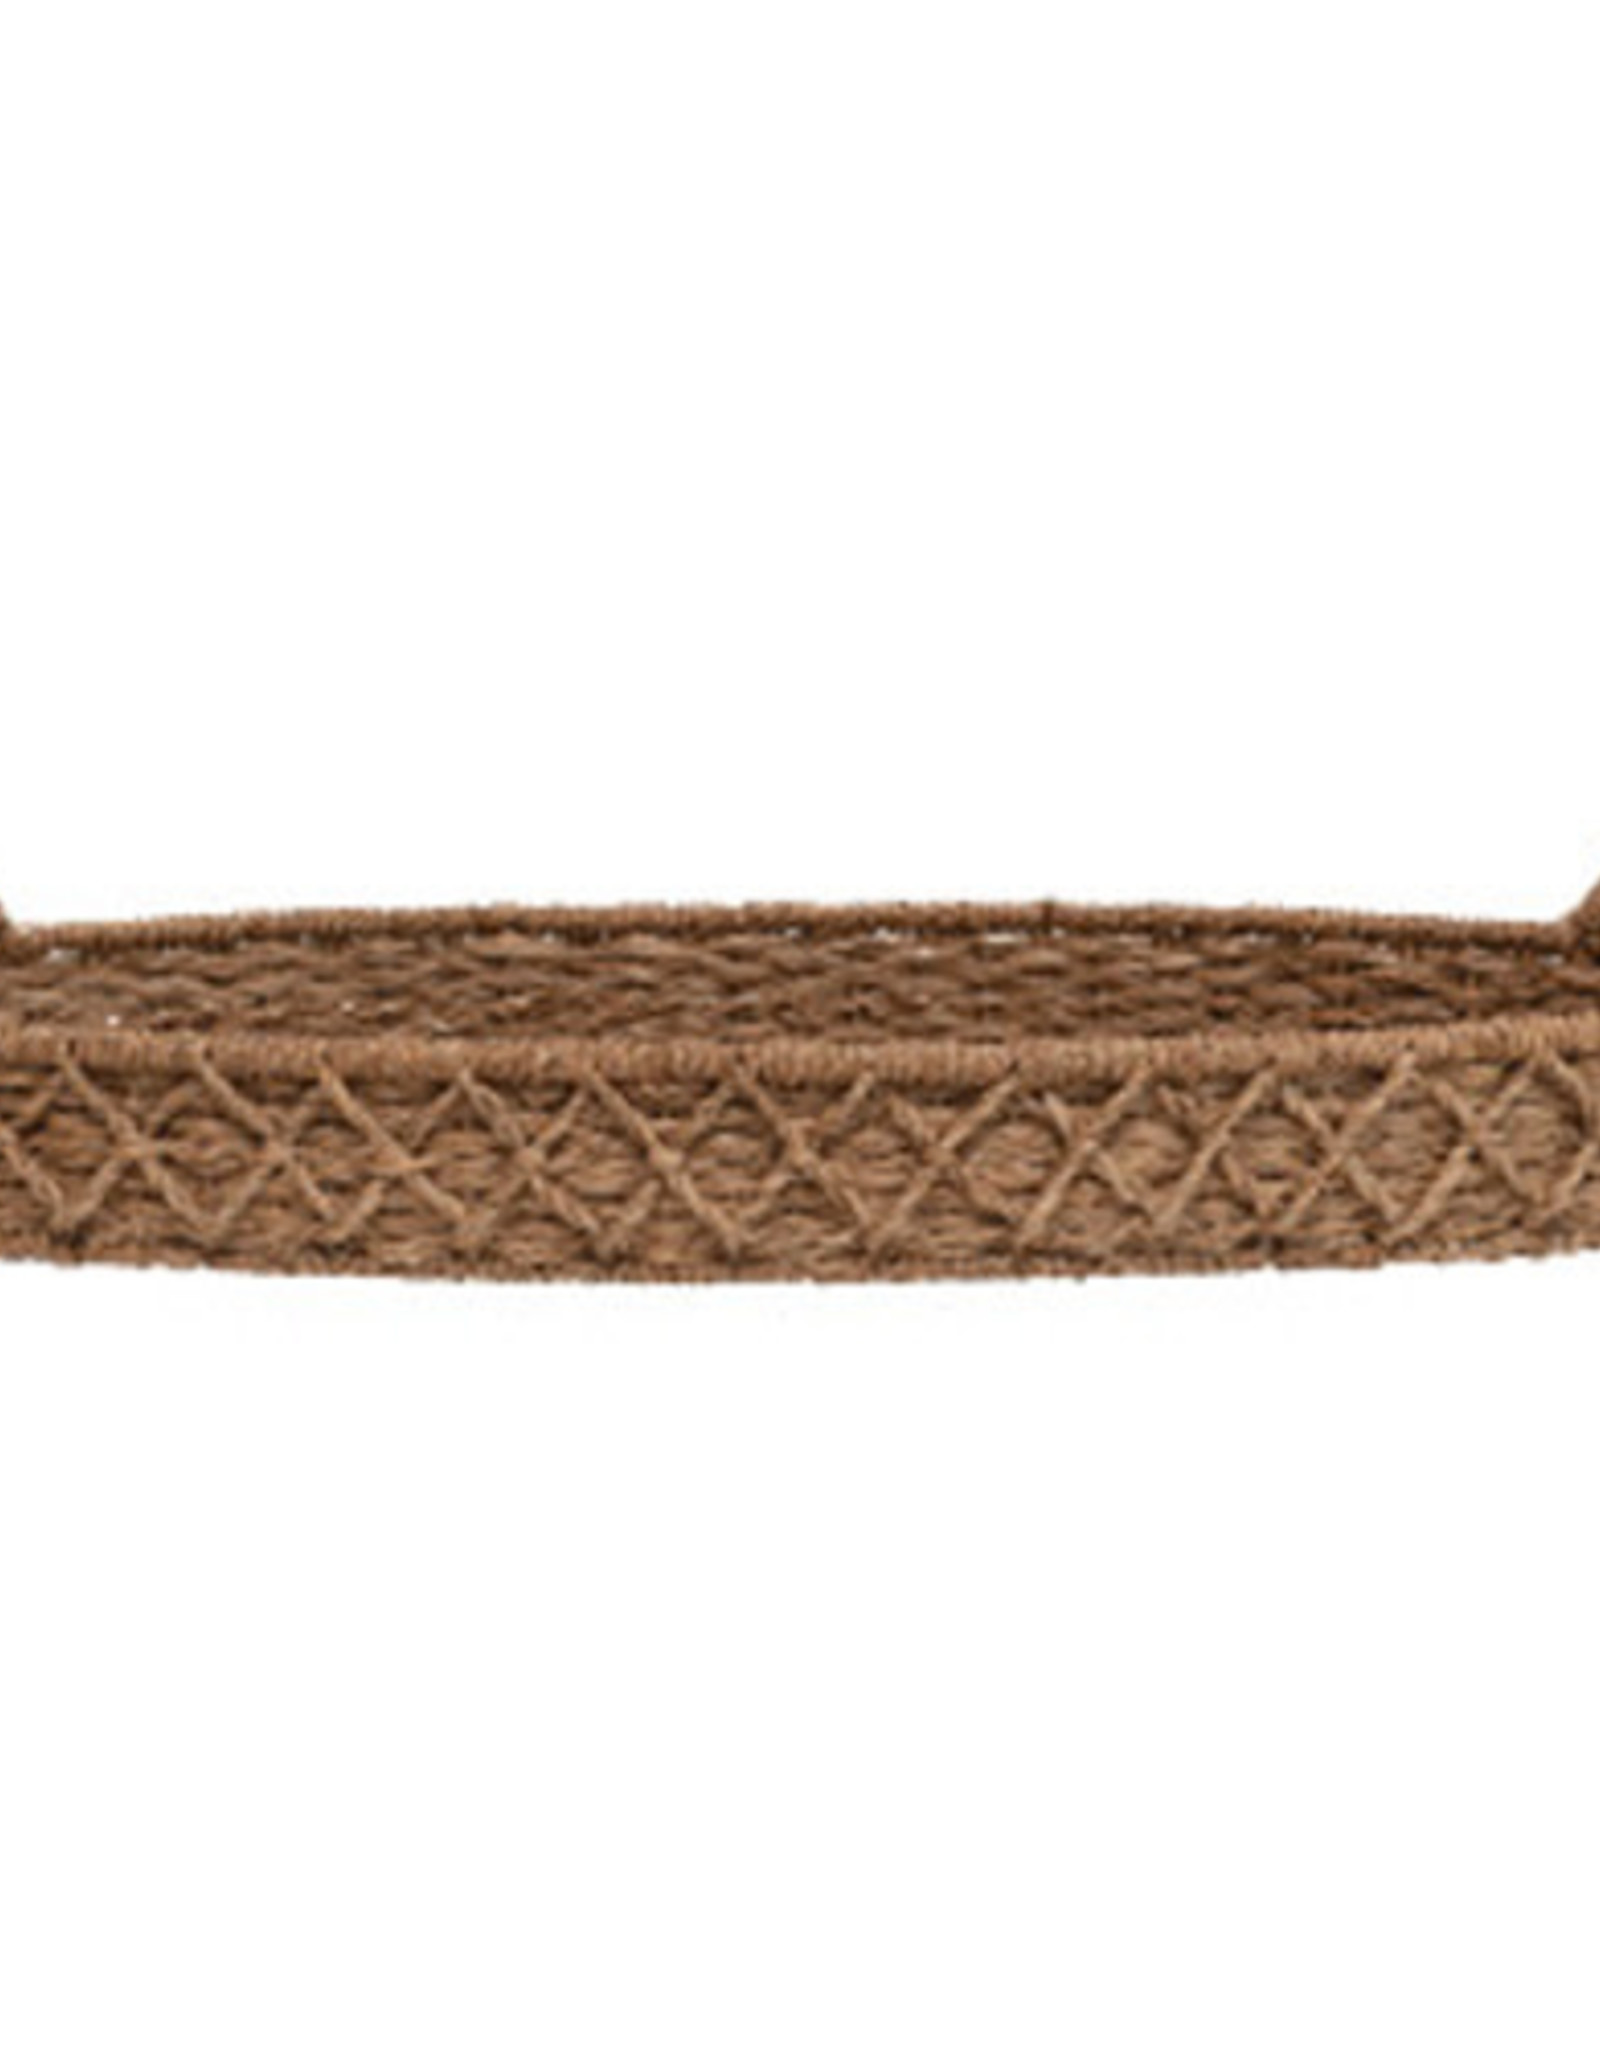 Woven Seagrass Oval Tray with Handles